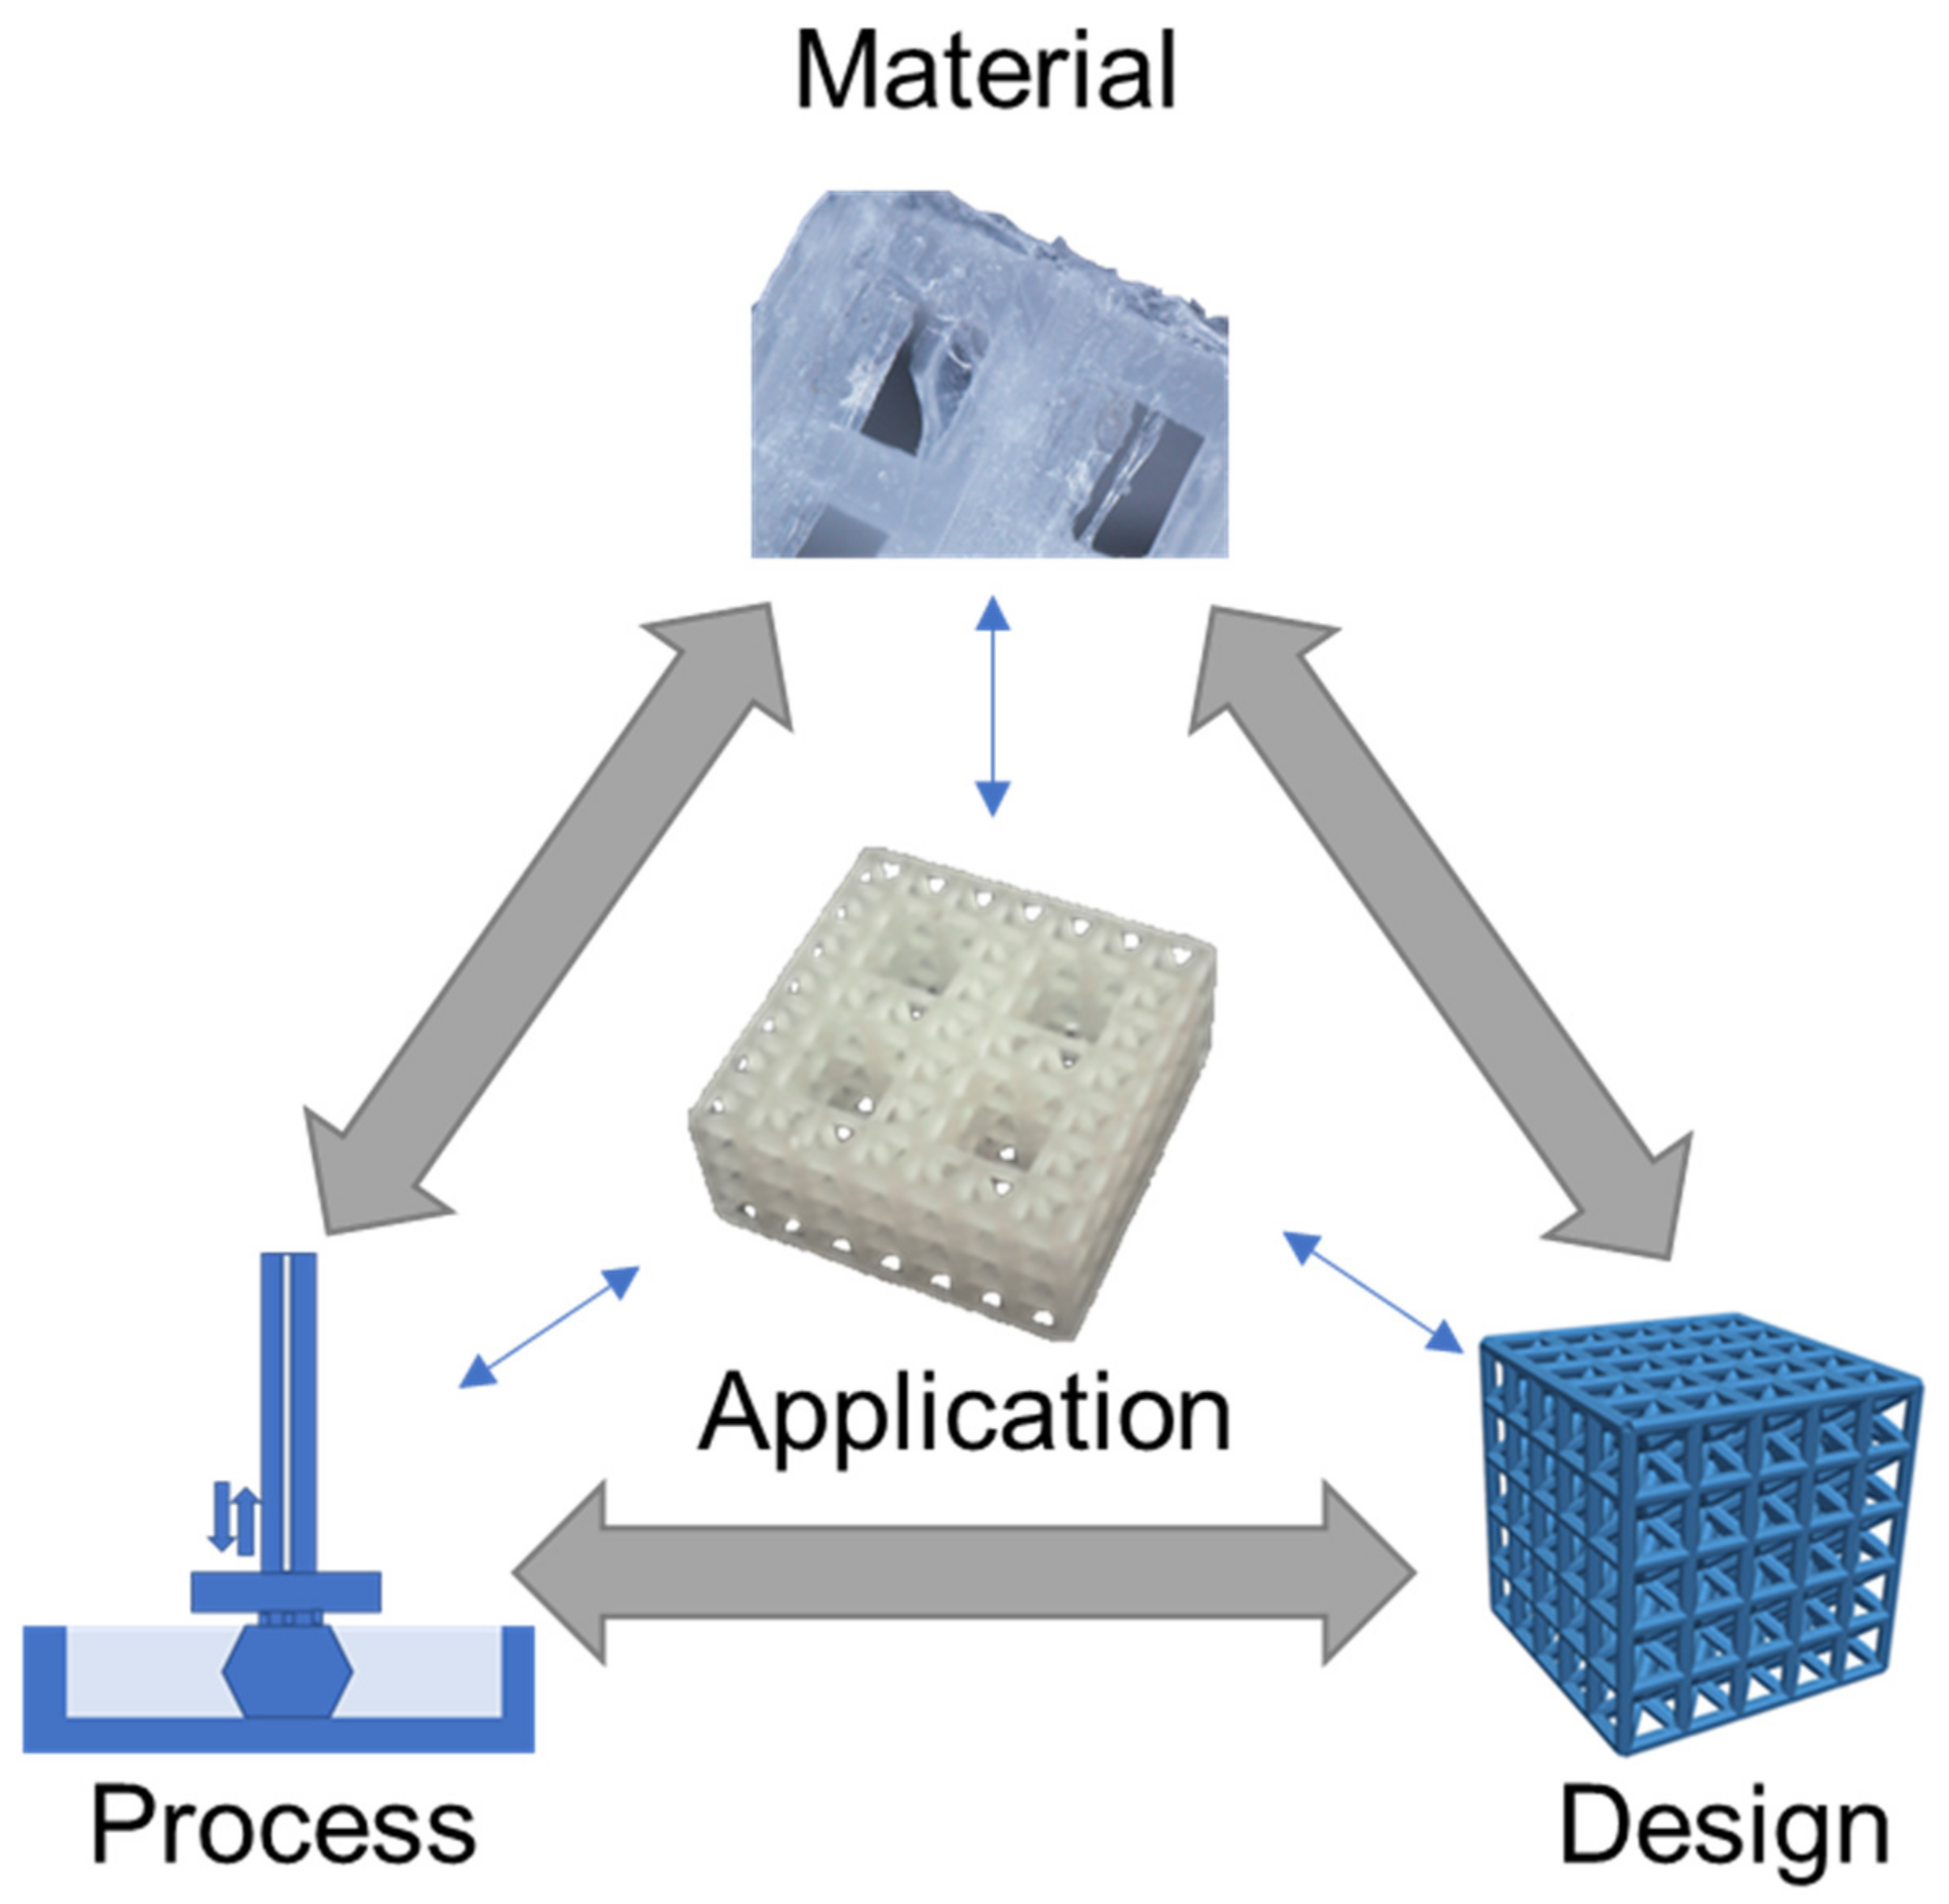 Polymers | Free Full-Text | Polymer 3D Review: Materials, Process, and Design Strategies for Medical Applications